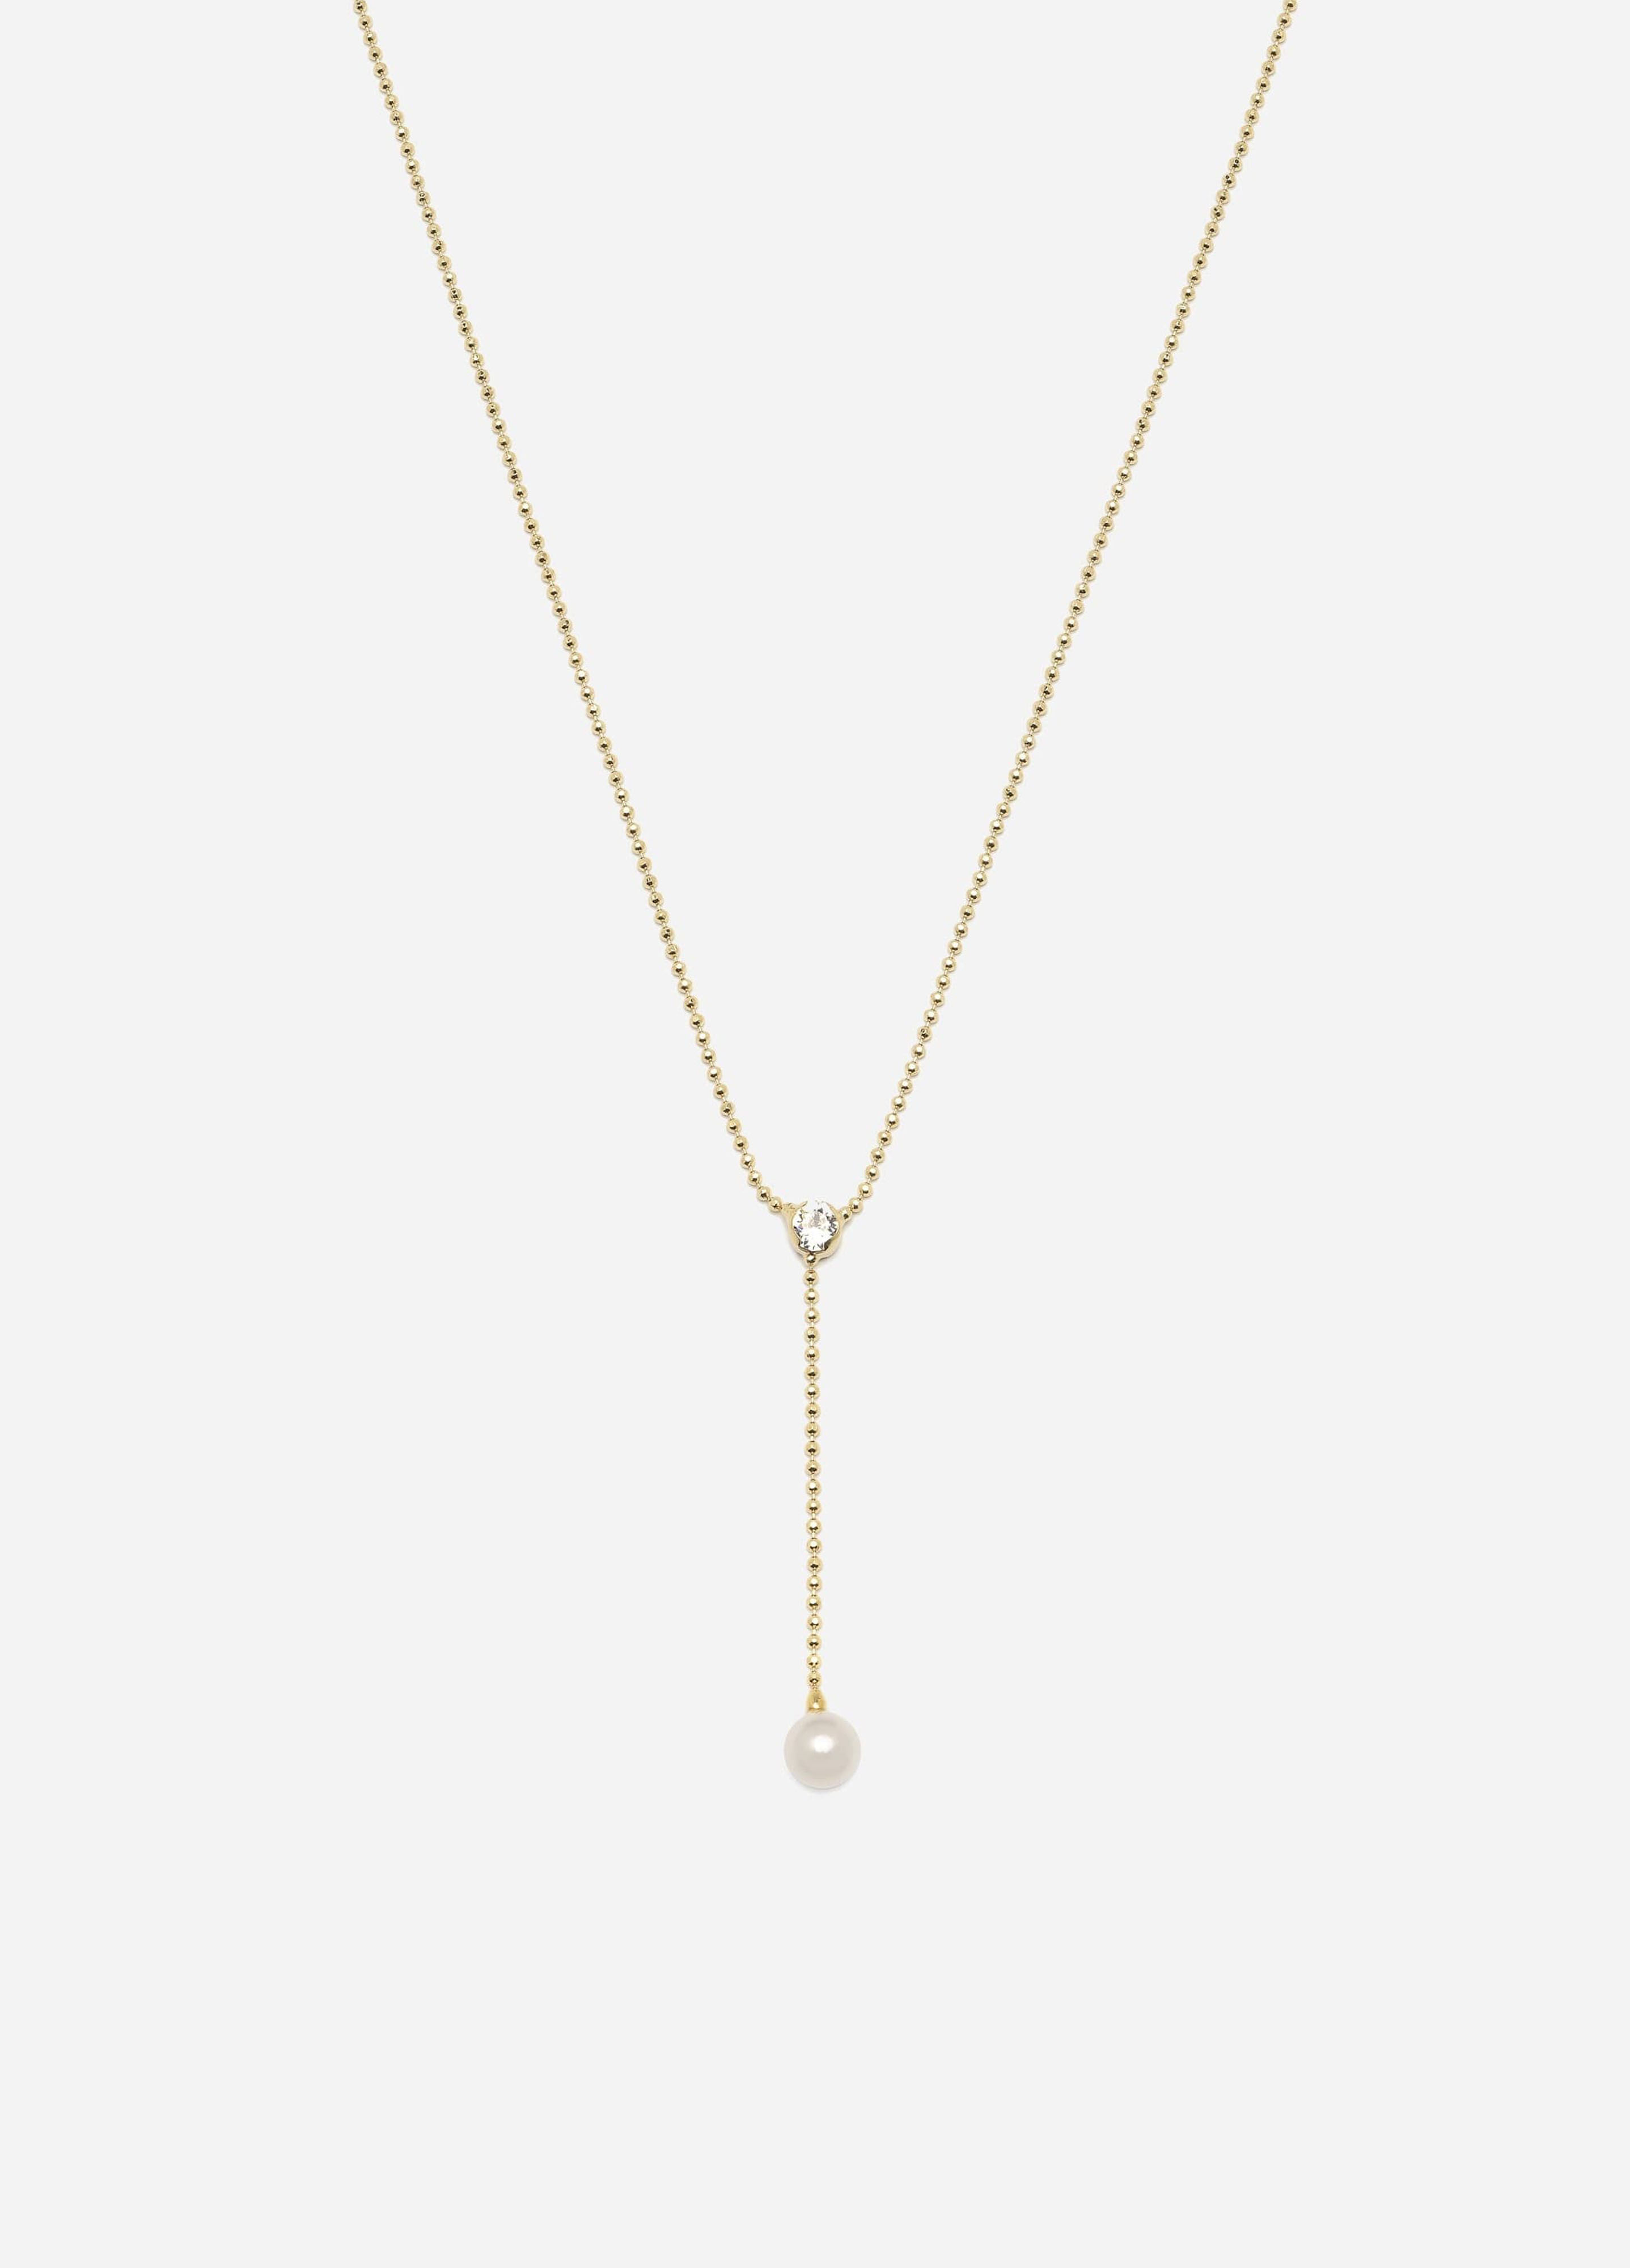 Lovey Necklace, Classic, Women, Gold